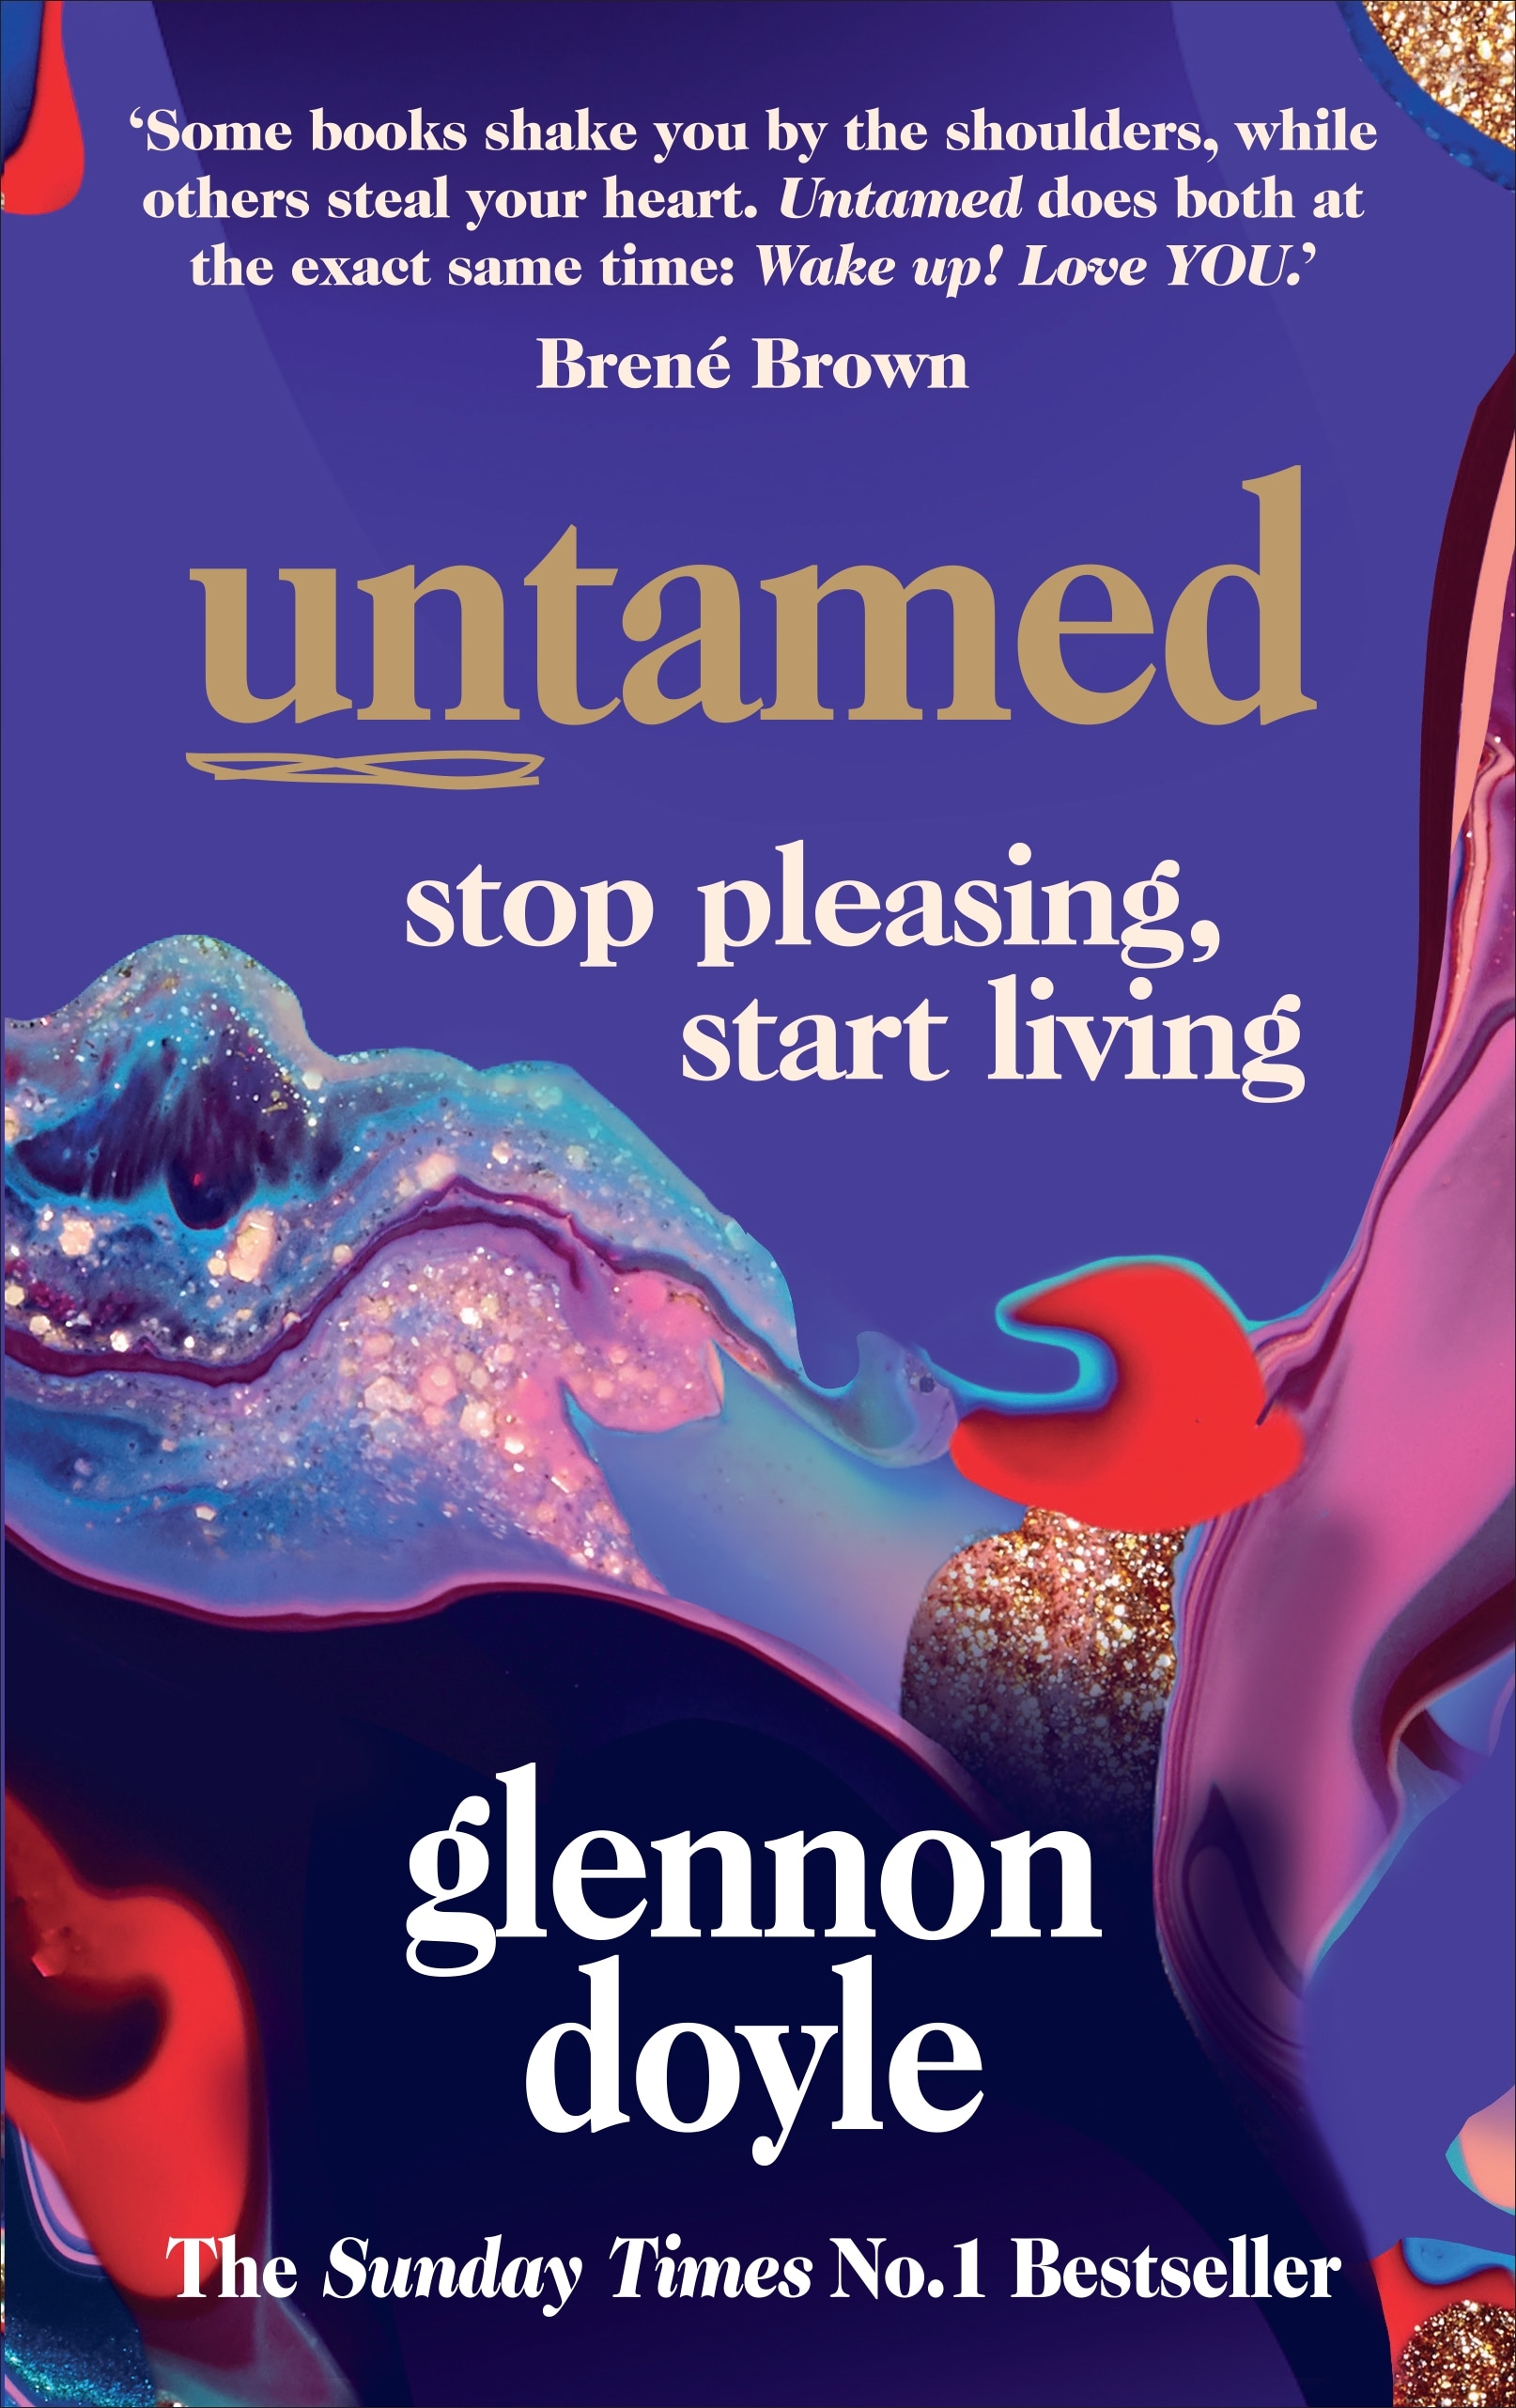 Book “Untamed” by Glennon Doyle — March 12, 2020